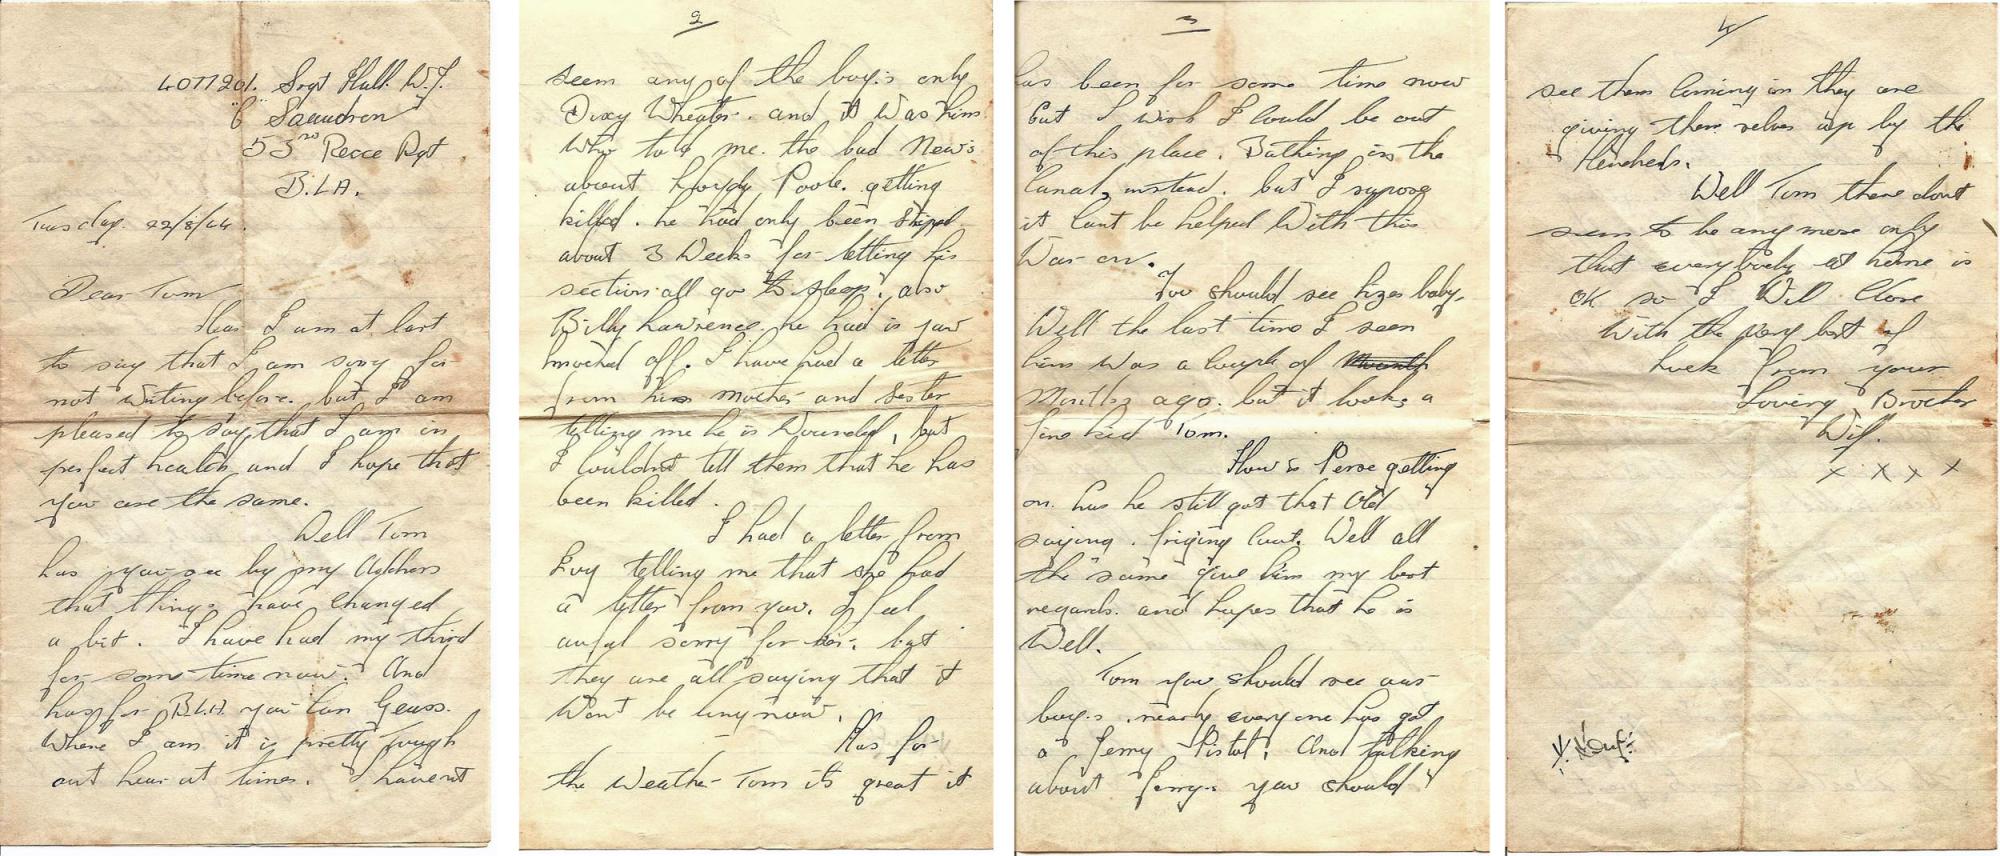 A letter from Wilfred Hall to his brother Thomas who was in No.1 Cdo